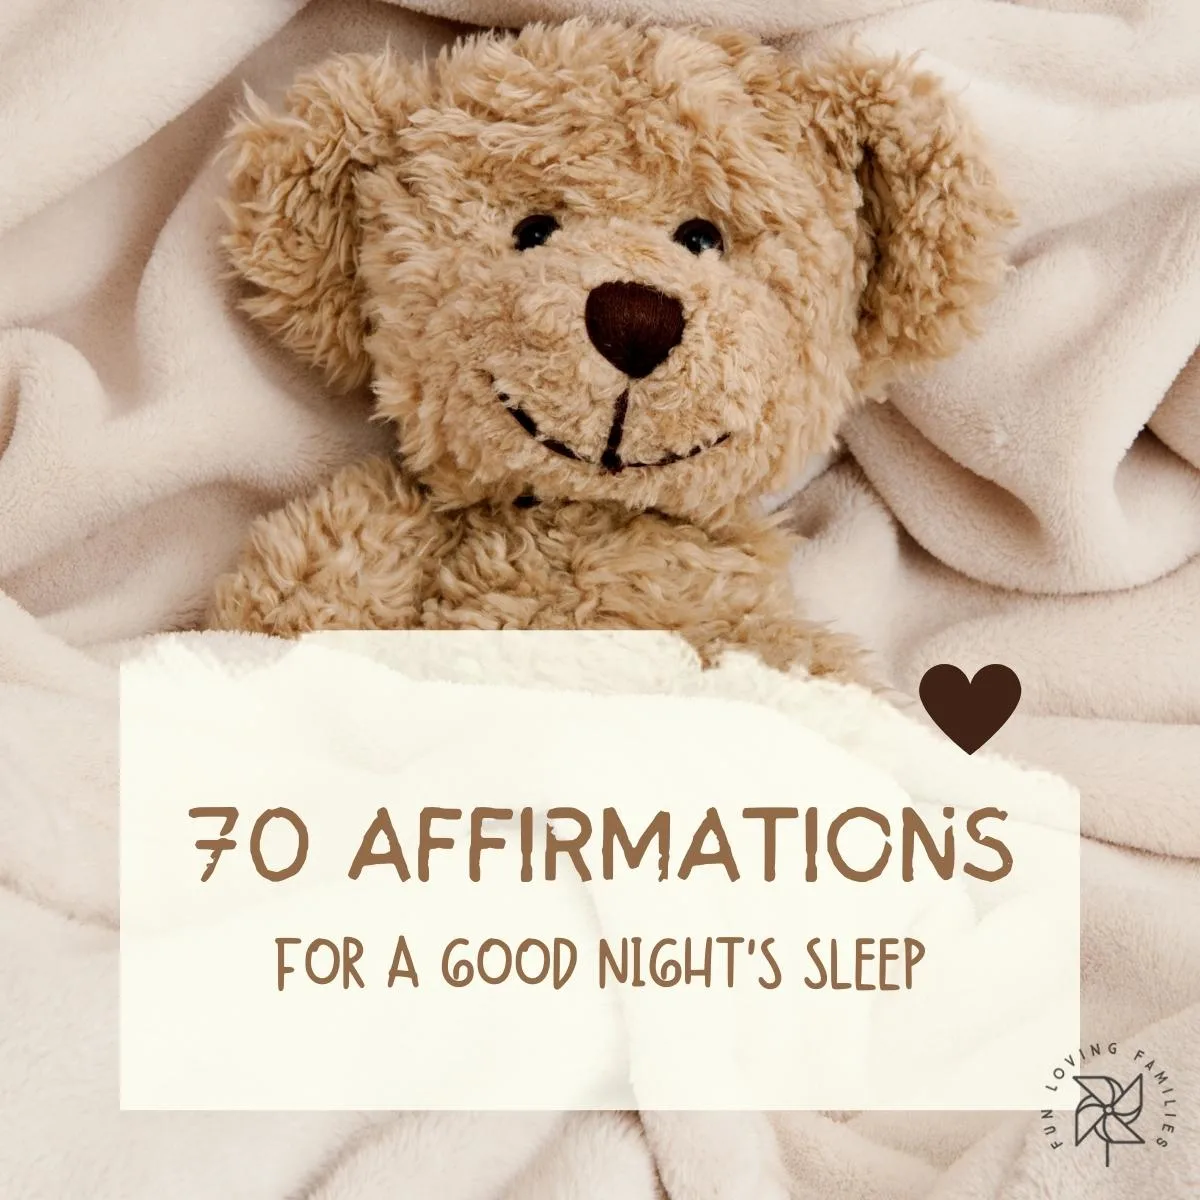 70 Affirmations to Get a Good Night’s Sleep